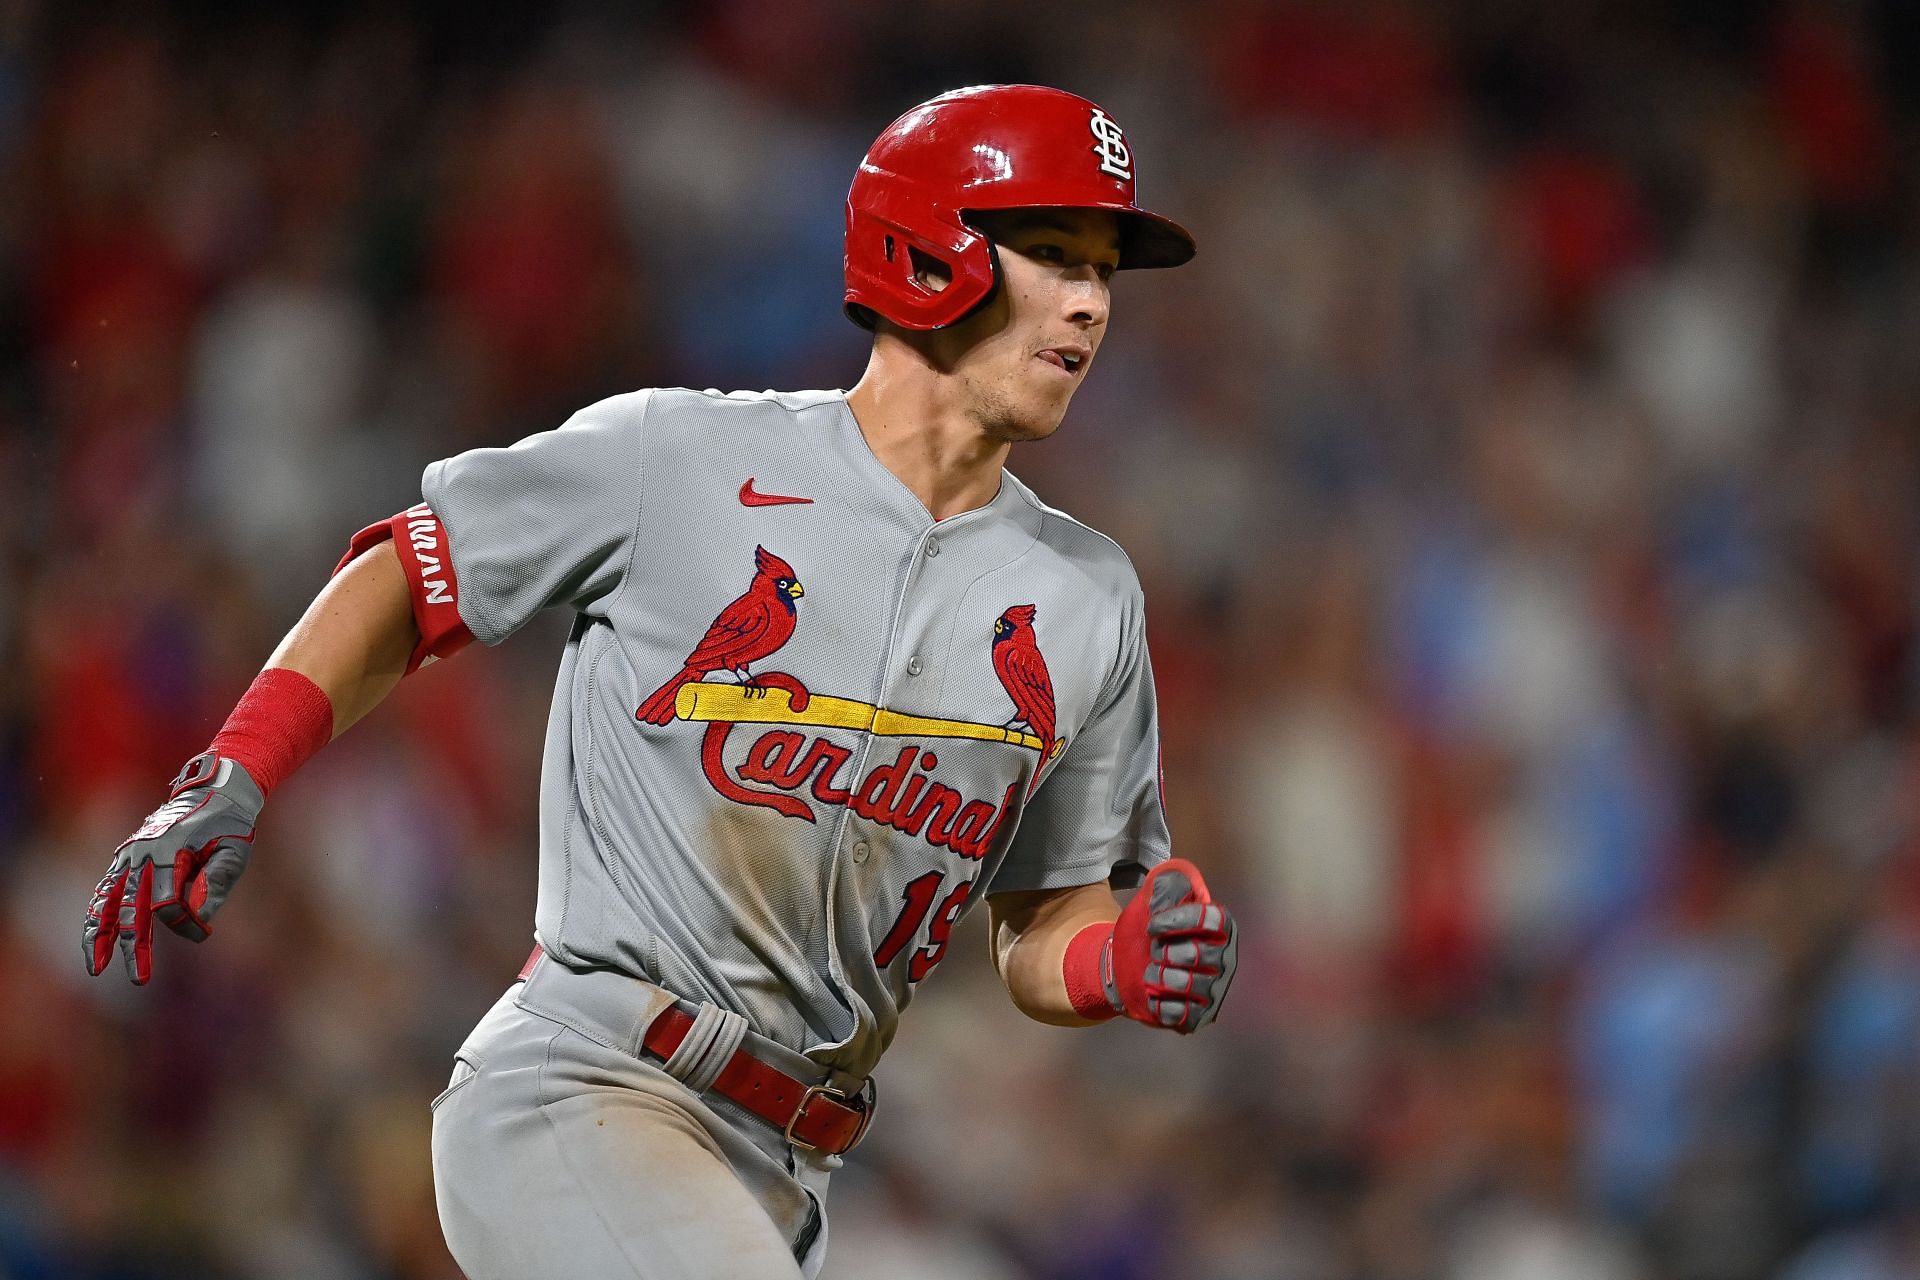 WATCH: St. Louis Cardinals Walk Off Pirates with Tommy Edman RBI